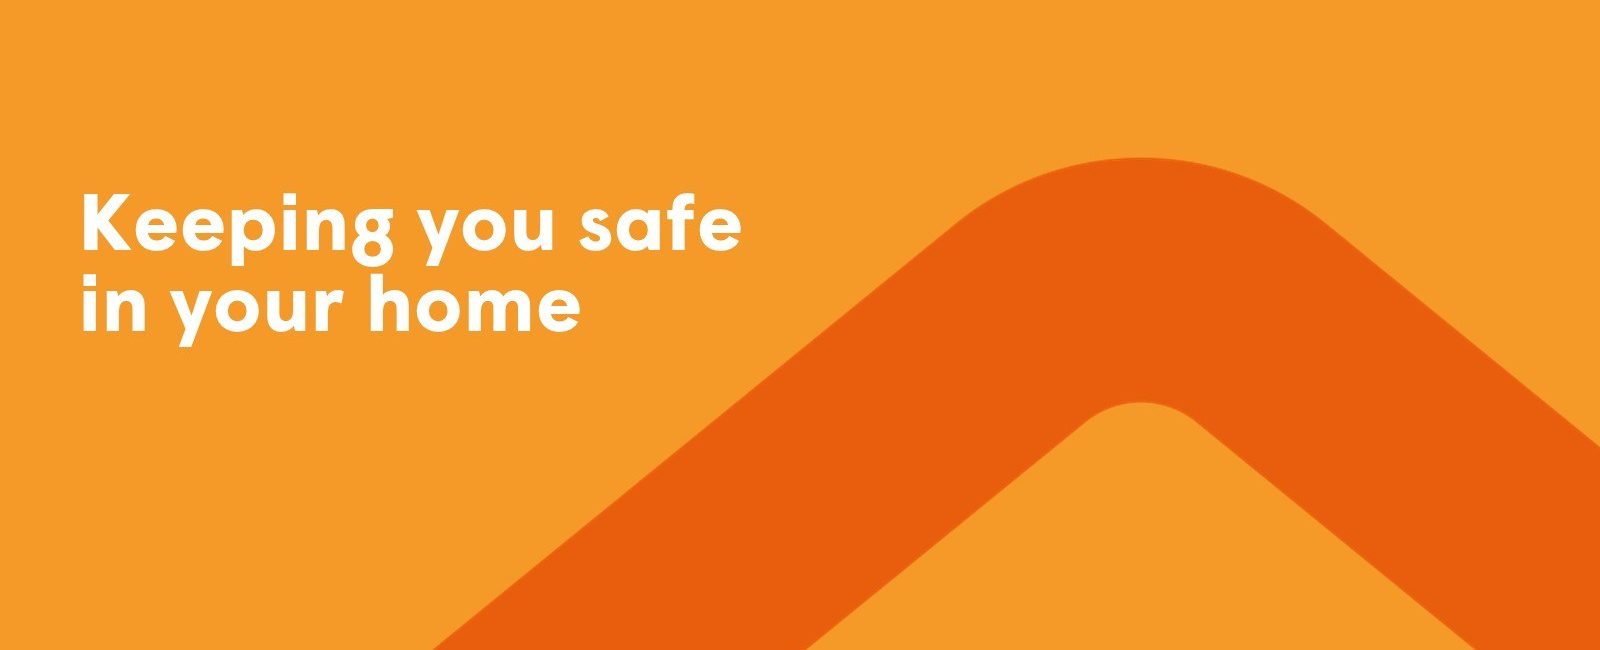 Keeping you safe in your home